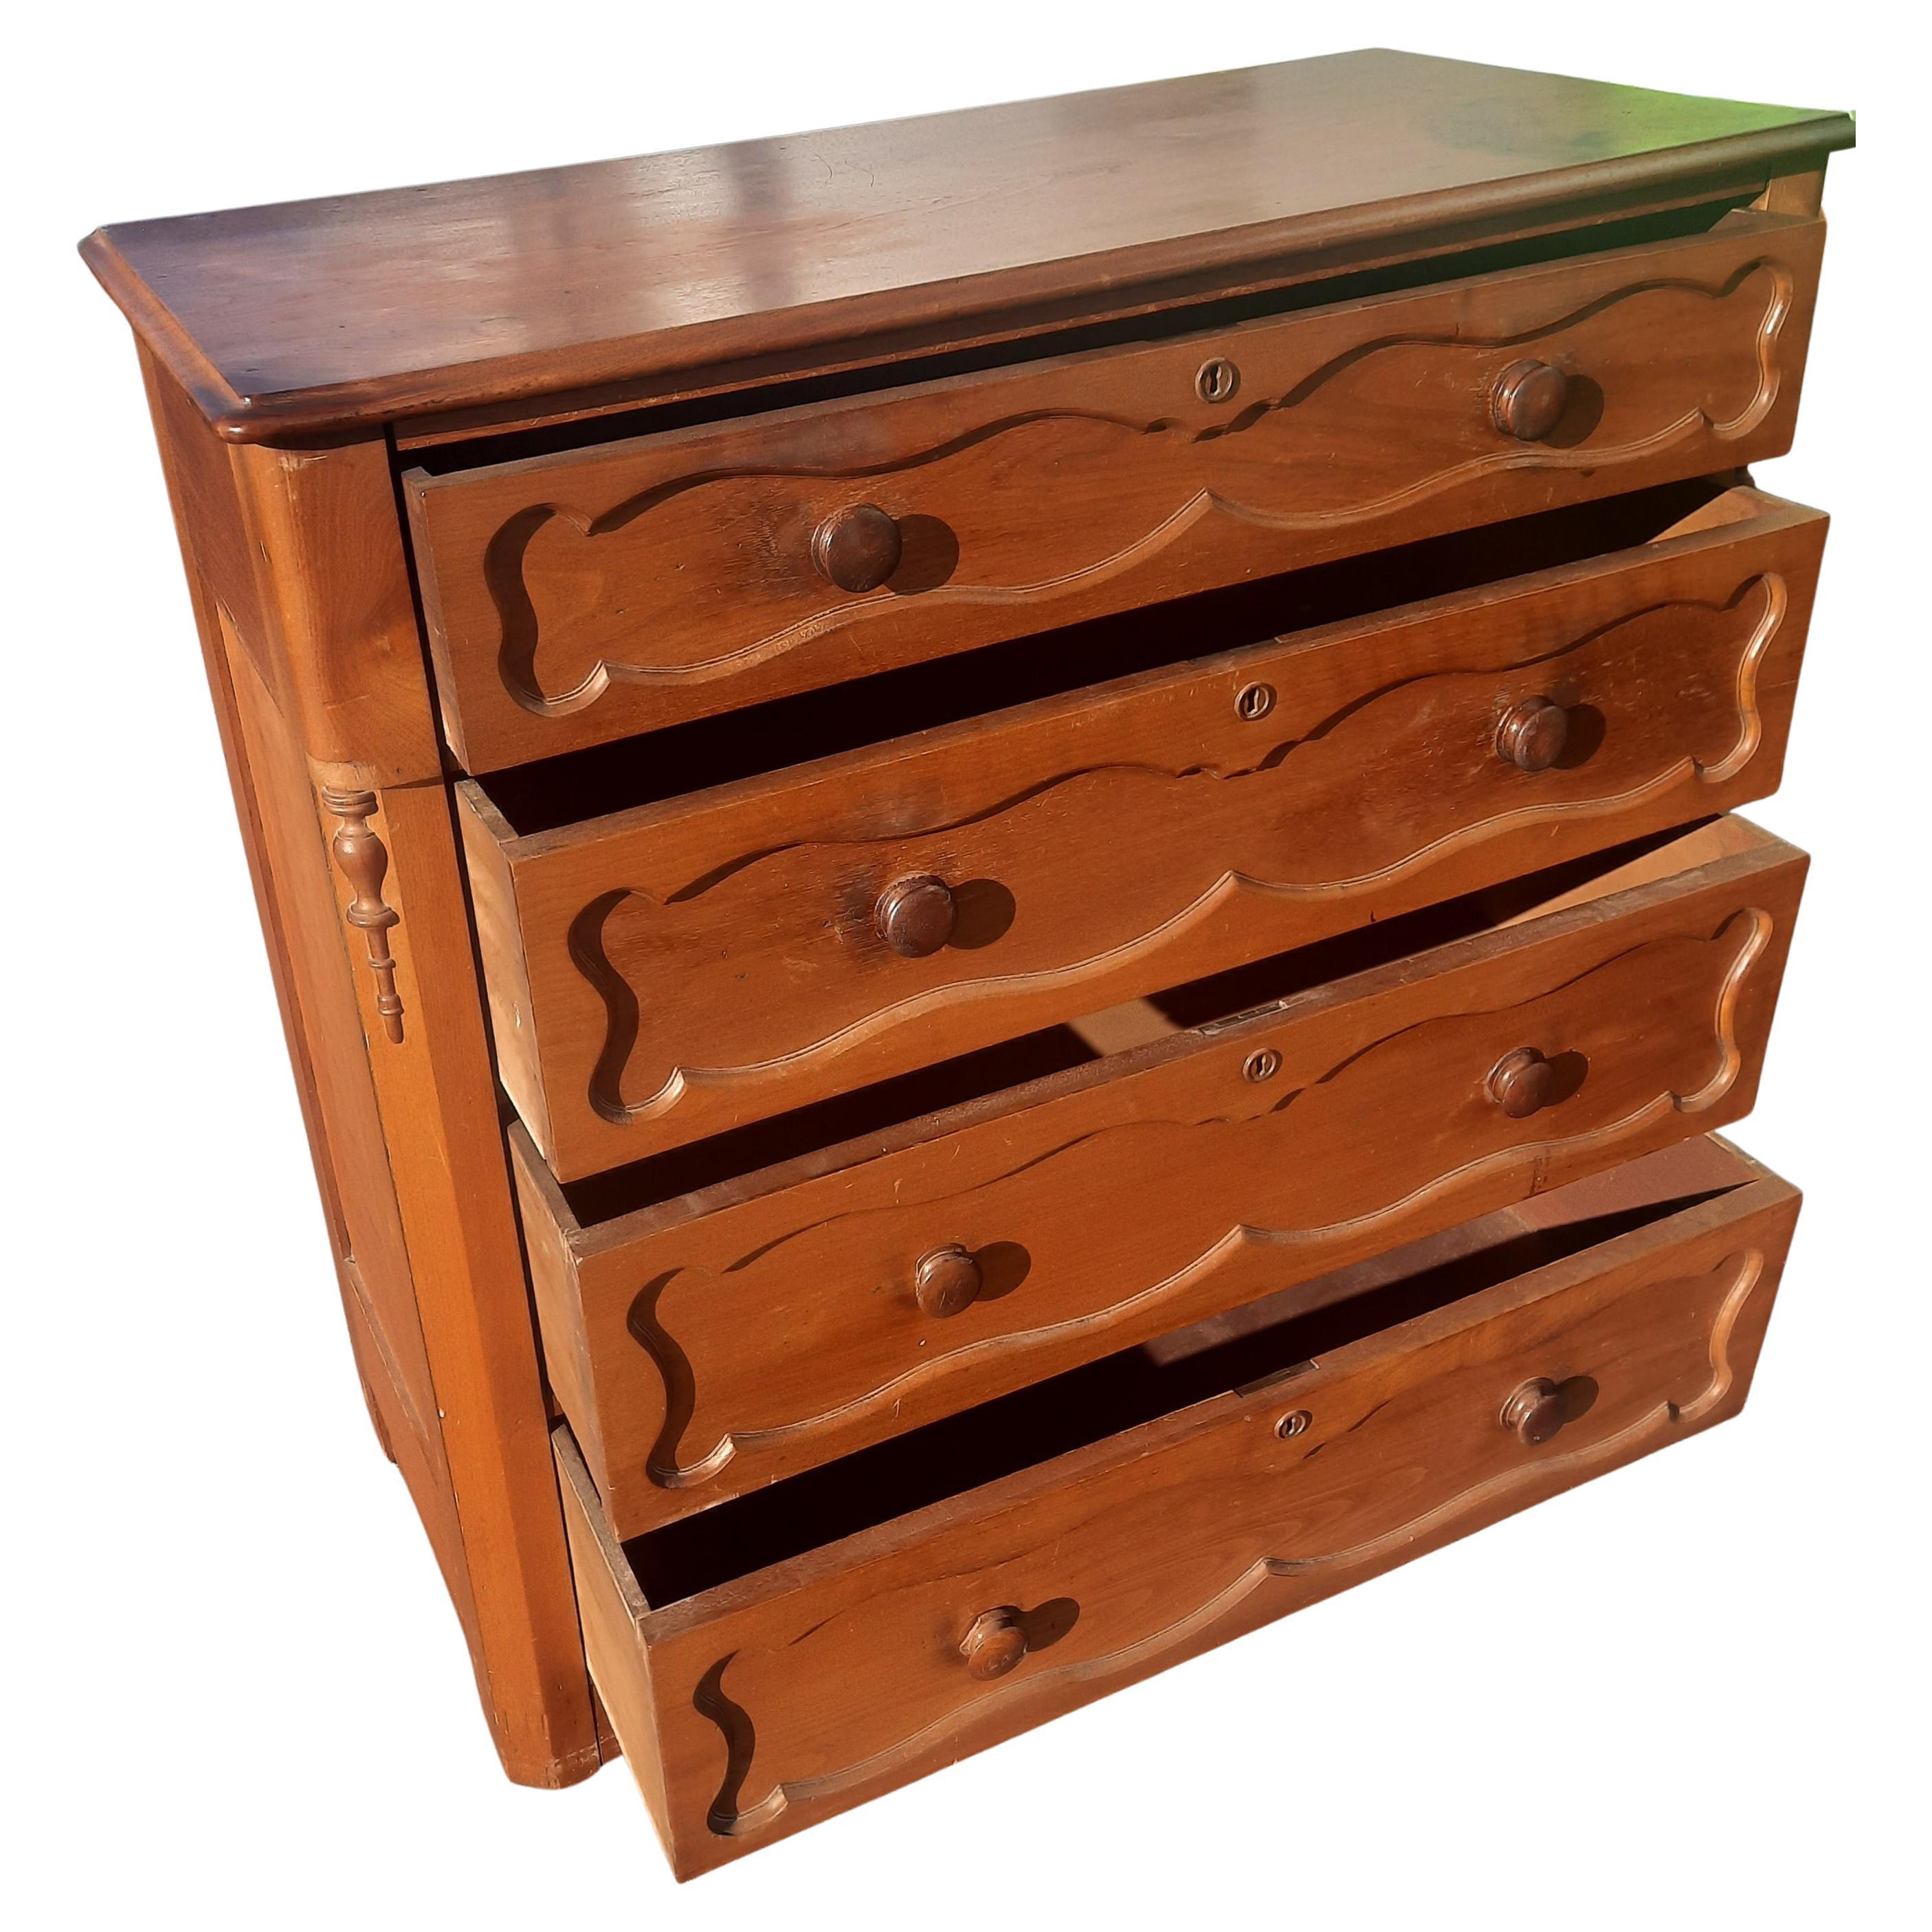 Hand-Crafted Antique Edwardian Walnut Chest of Drawers on Wheels, circa 1920s For Sale